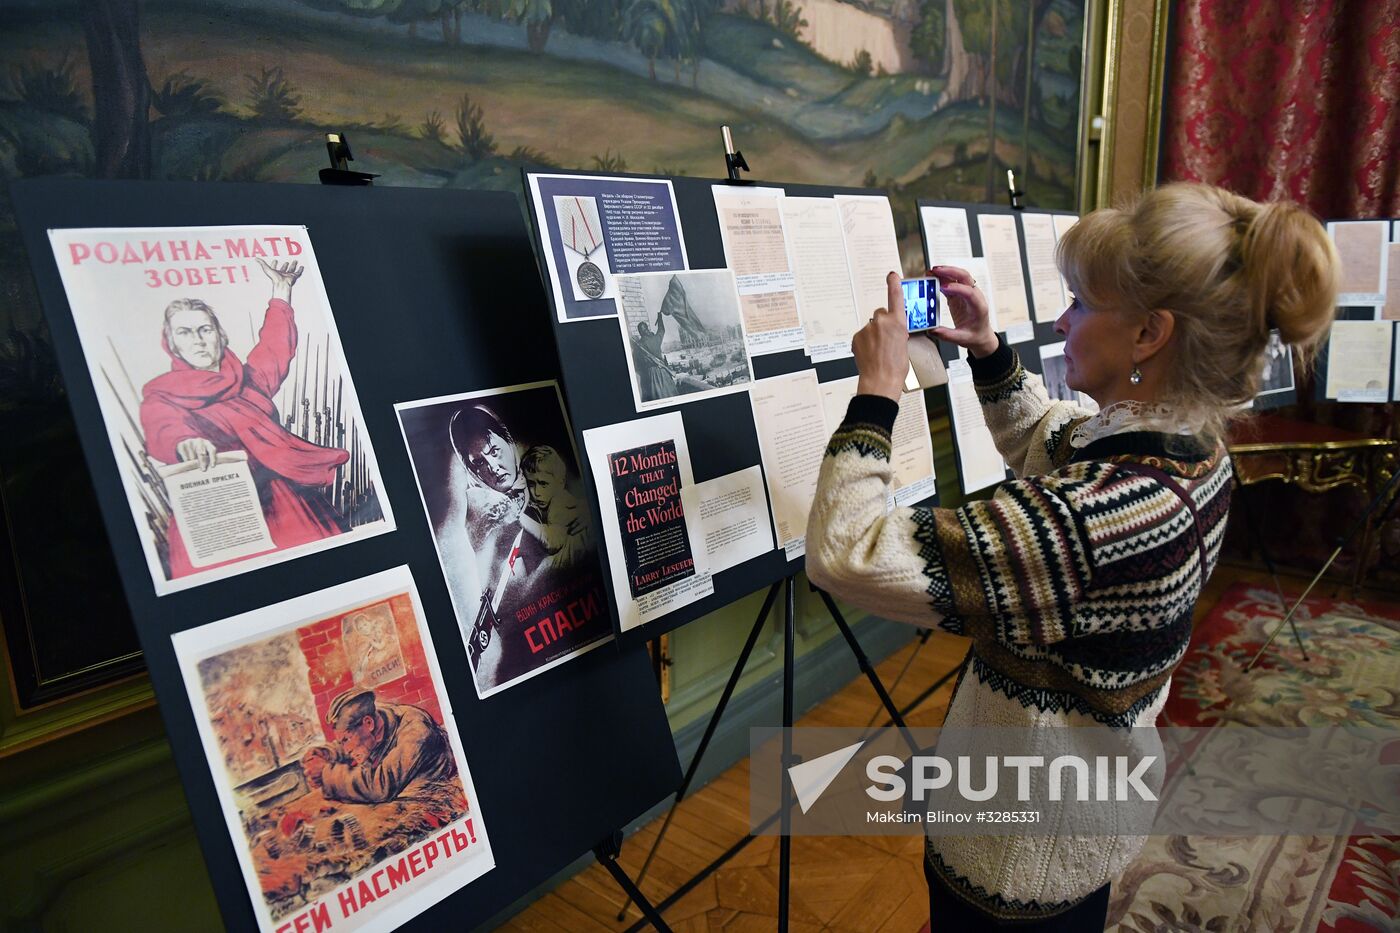 Commemorative events marking 75th anniversary of victory in Battle of Stalingrad